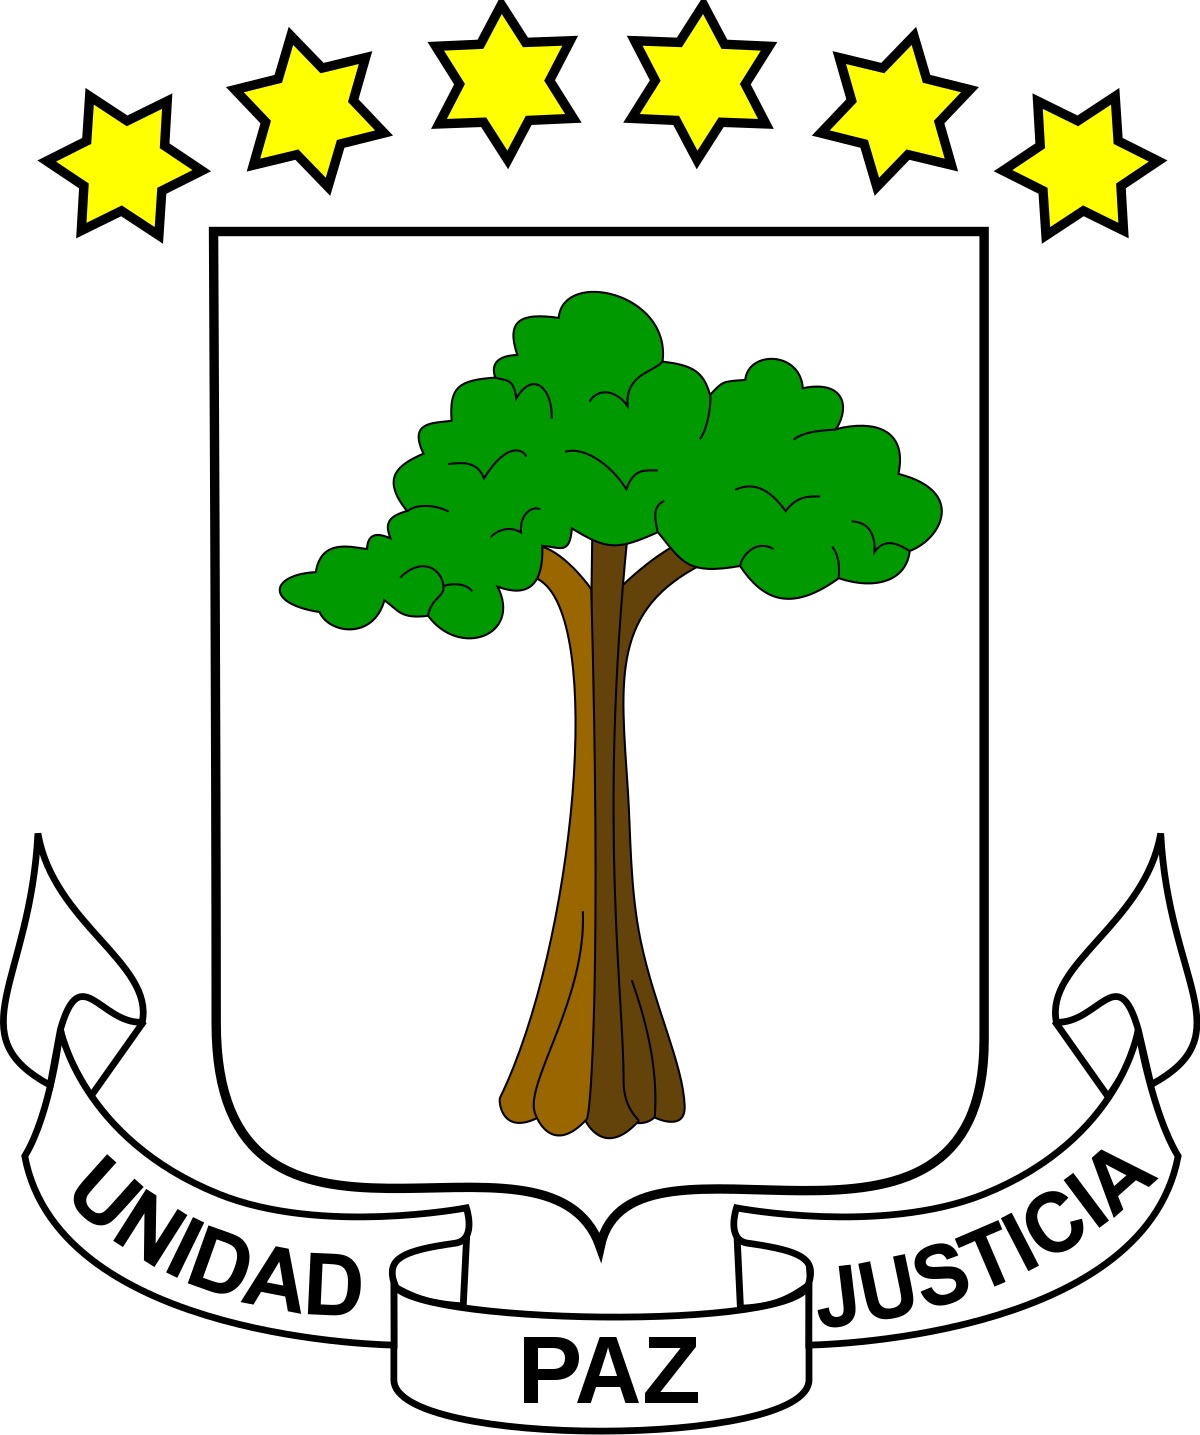 Equatorial Guinea: Official Web Page of the Government